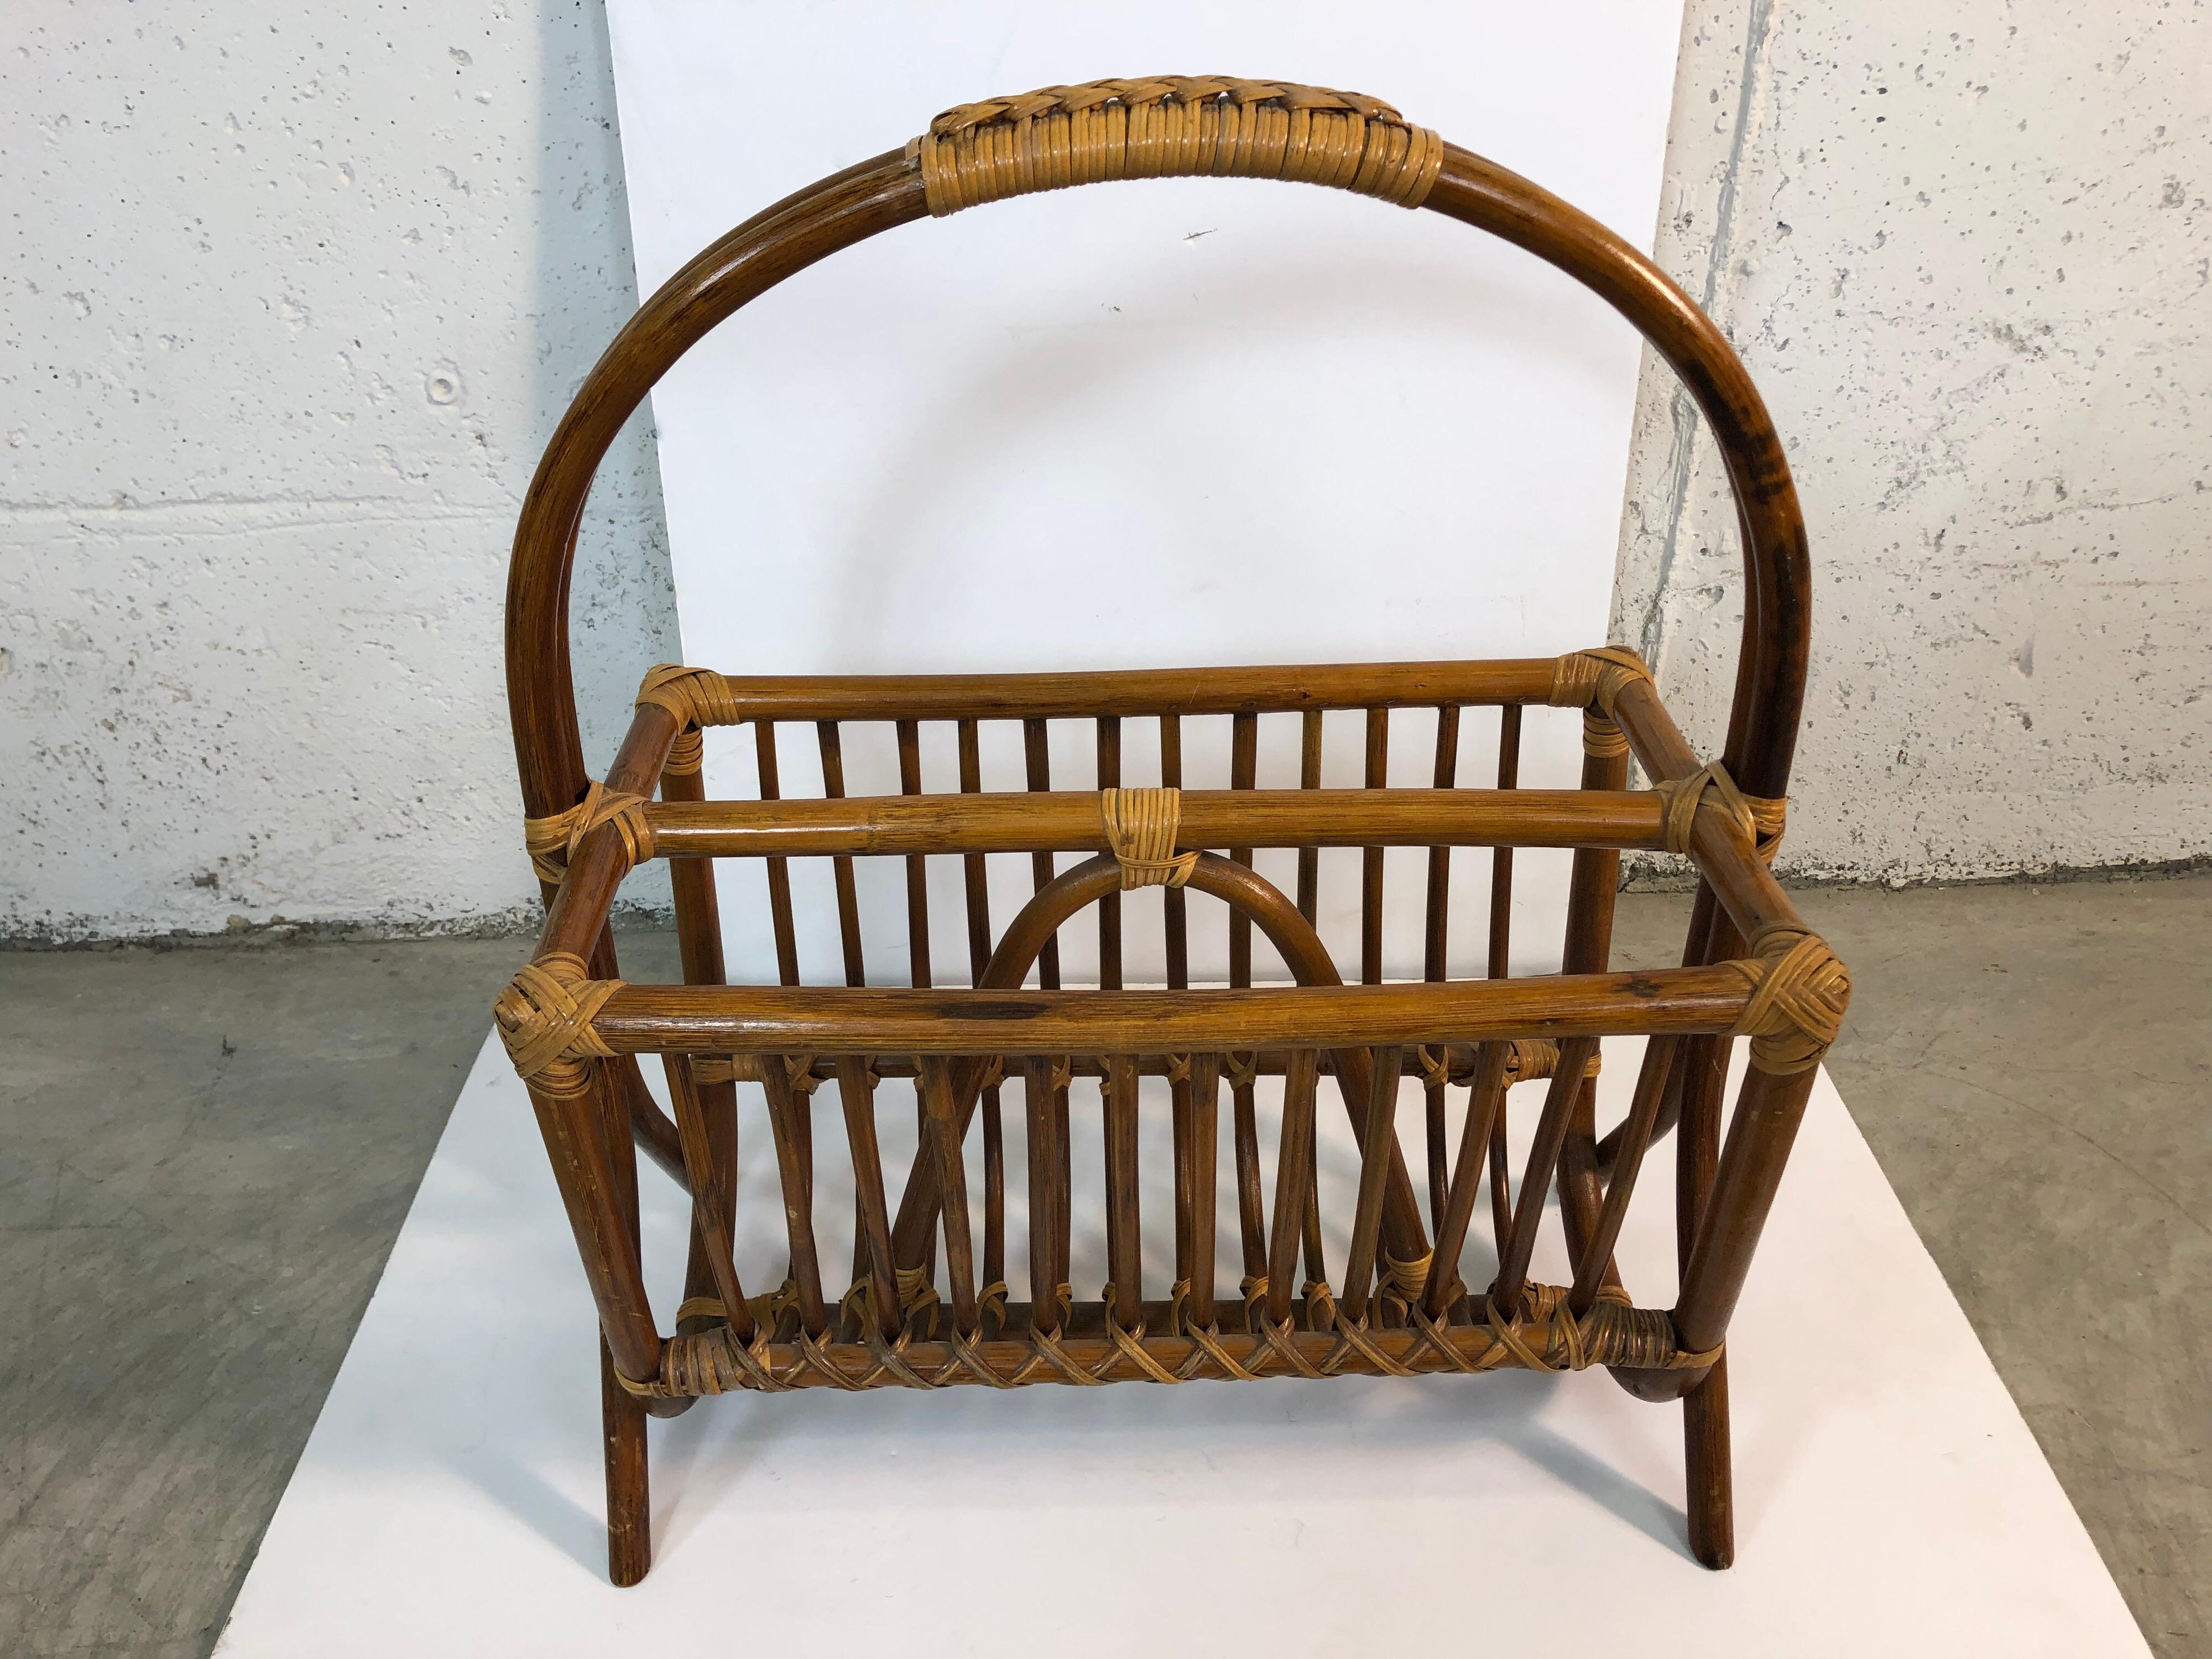 1960s Mid-Century Modern rattan handled magazine rack with weaved accents on the corners and on top of the handle. Very good used condition, no breaks.